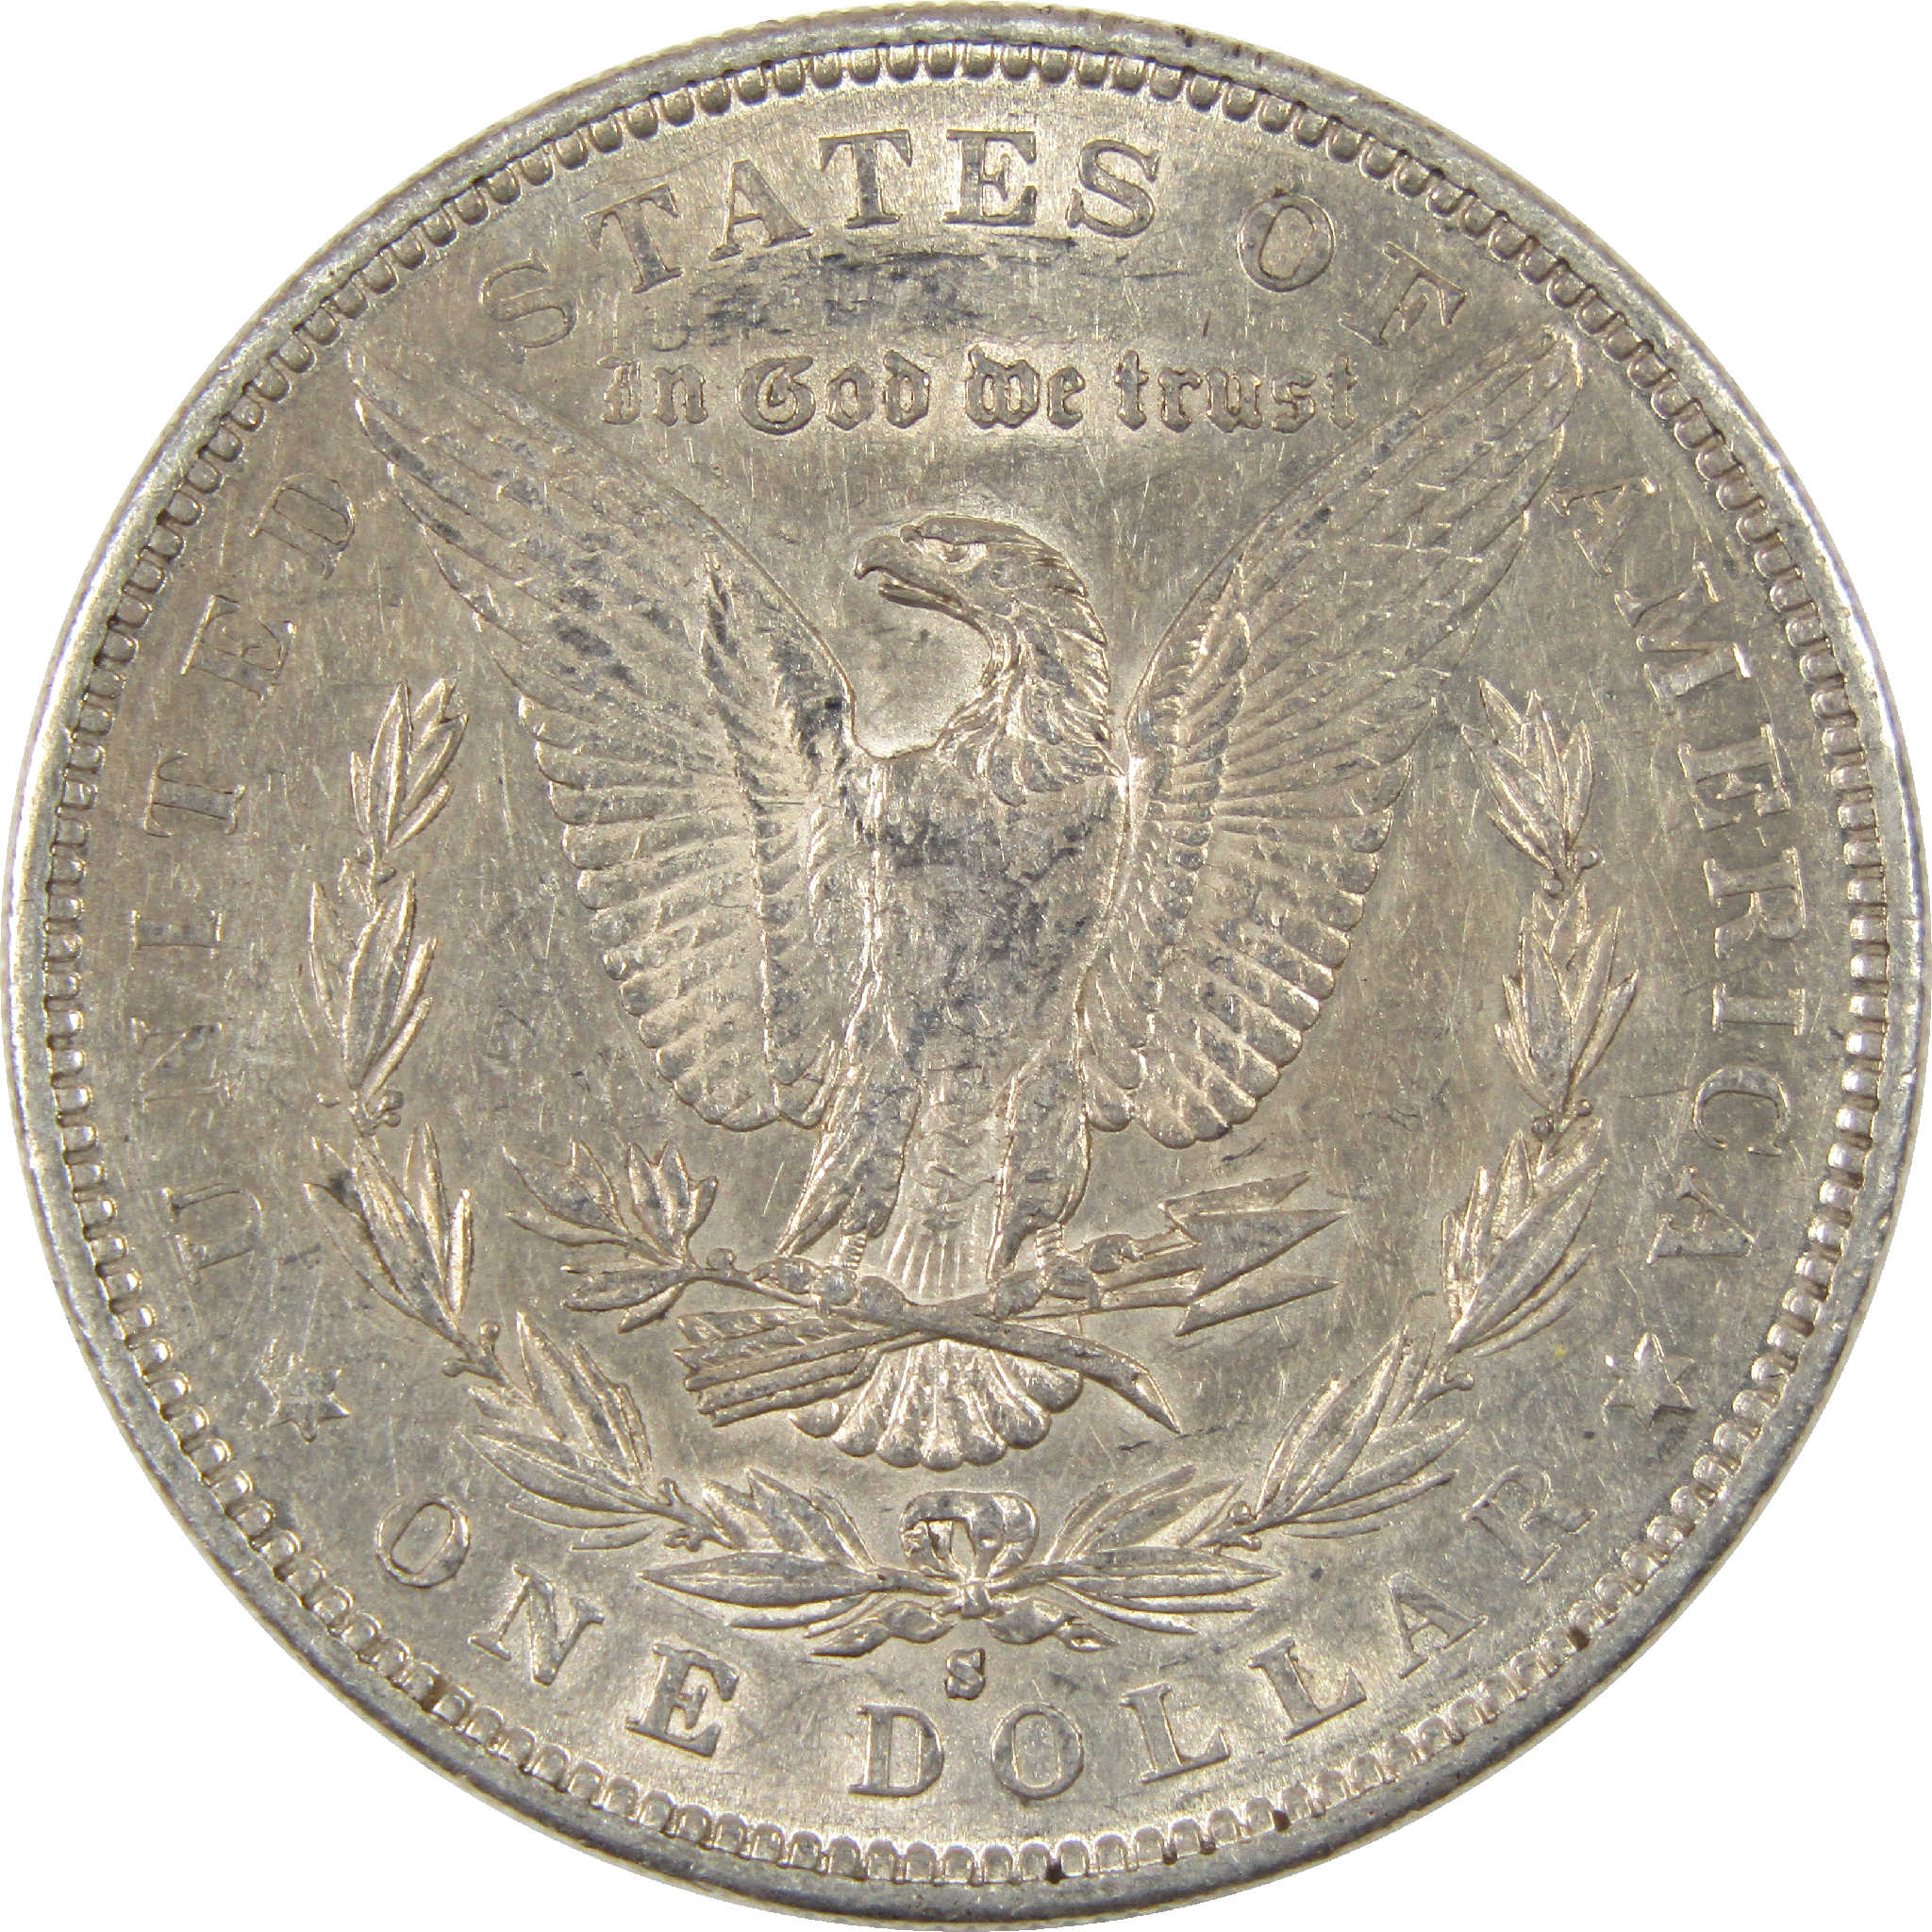 1883 S Morgan Dollar XF EF Extremely Fine Silver $1 Coin SKU:I11347 - Morgan coin - Morgan silver dollar - Morgan silver dollar for sale - Profile Coins &amp; Collectibles